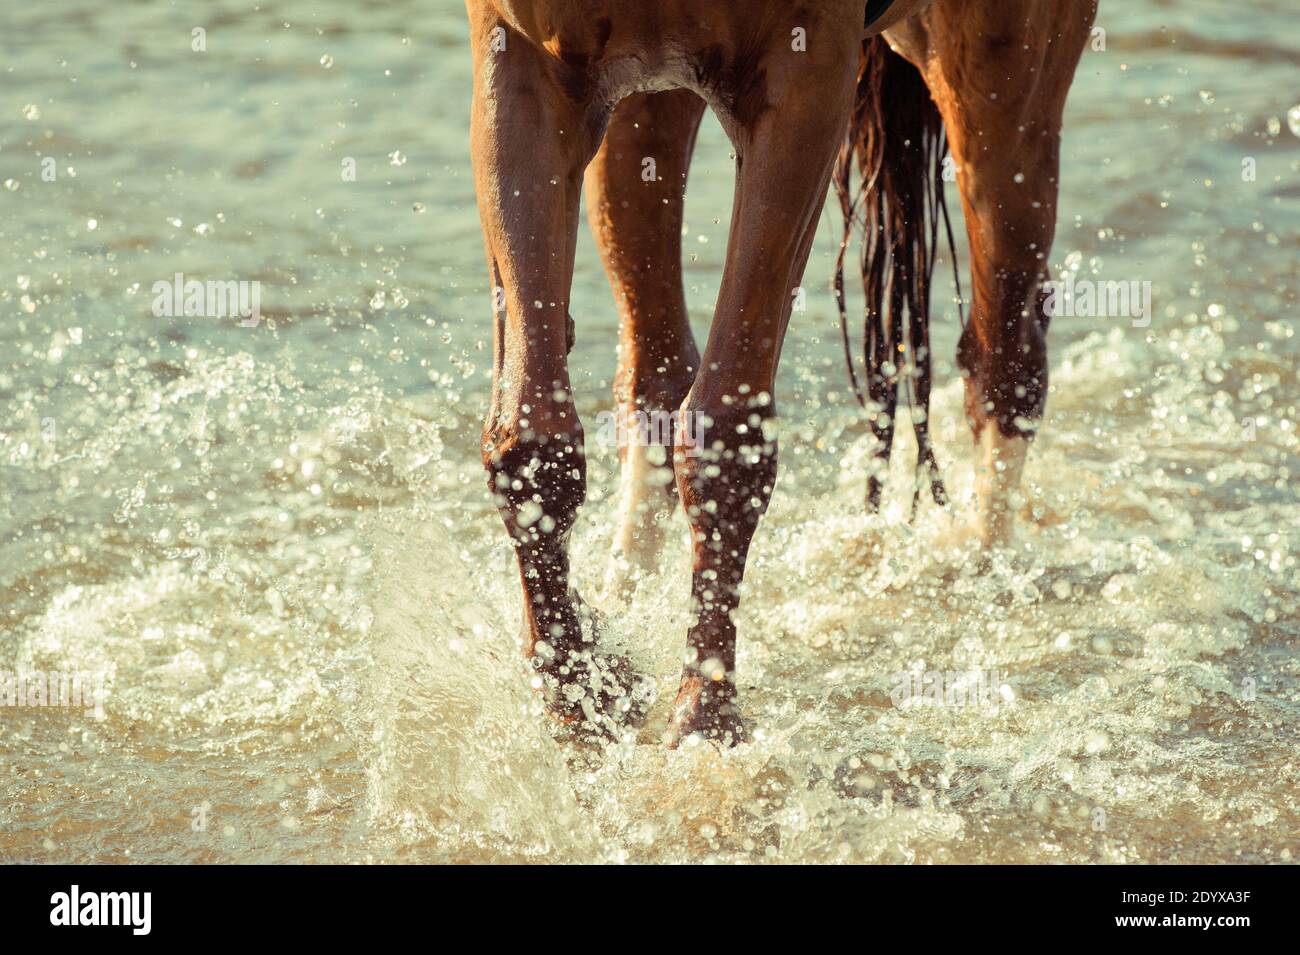 Horse runs with water splashes in a hot summer day Stock Photo